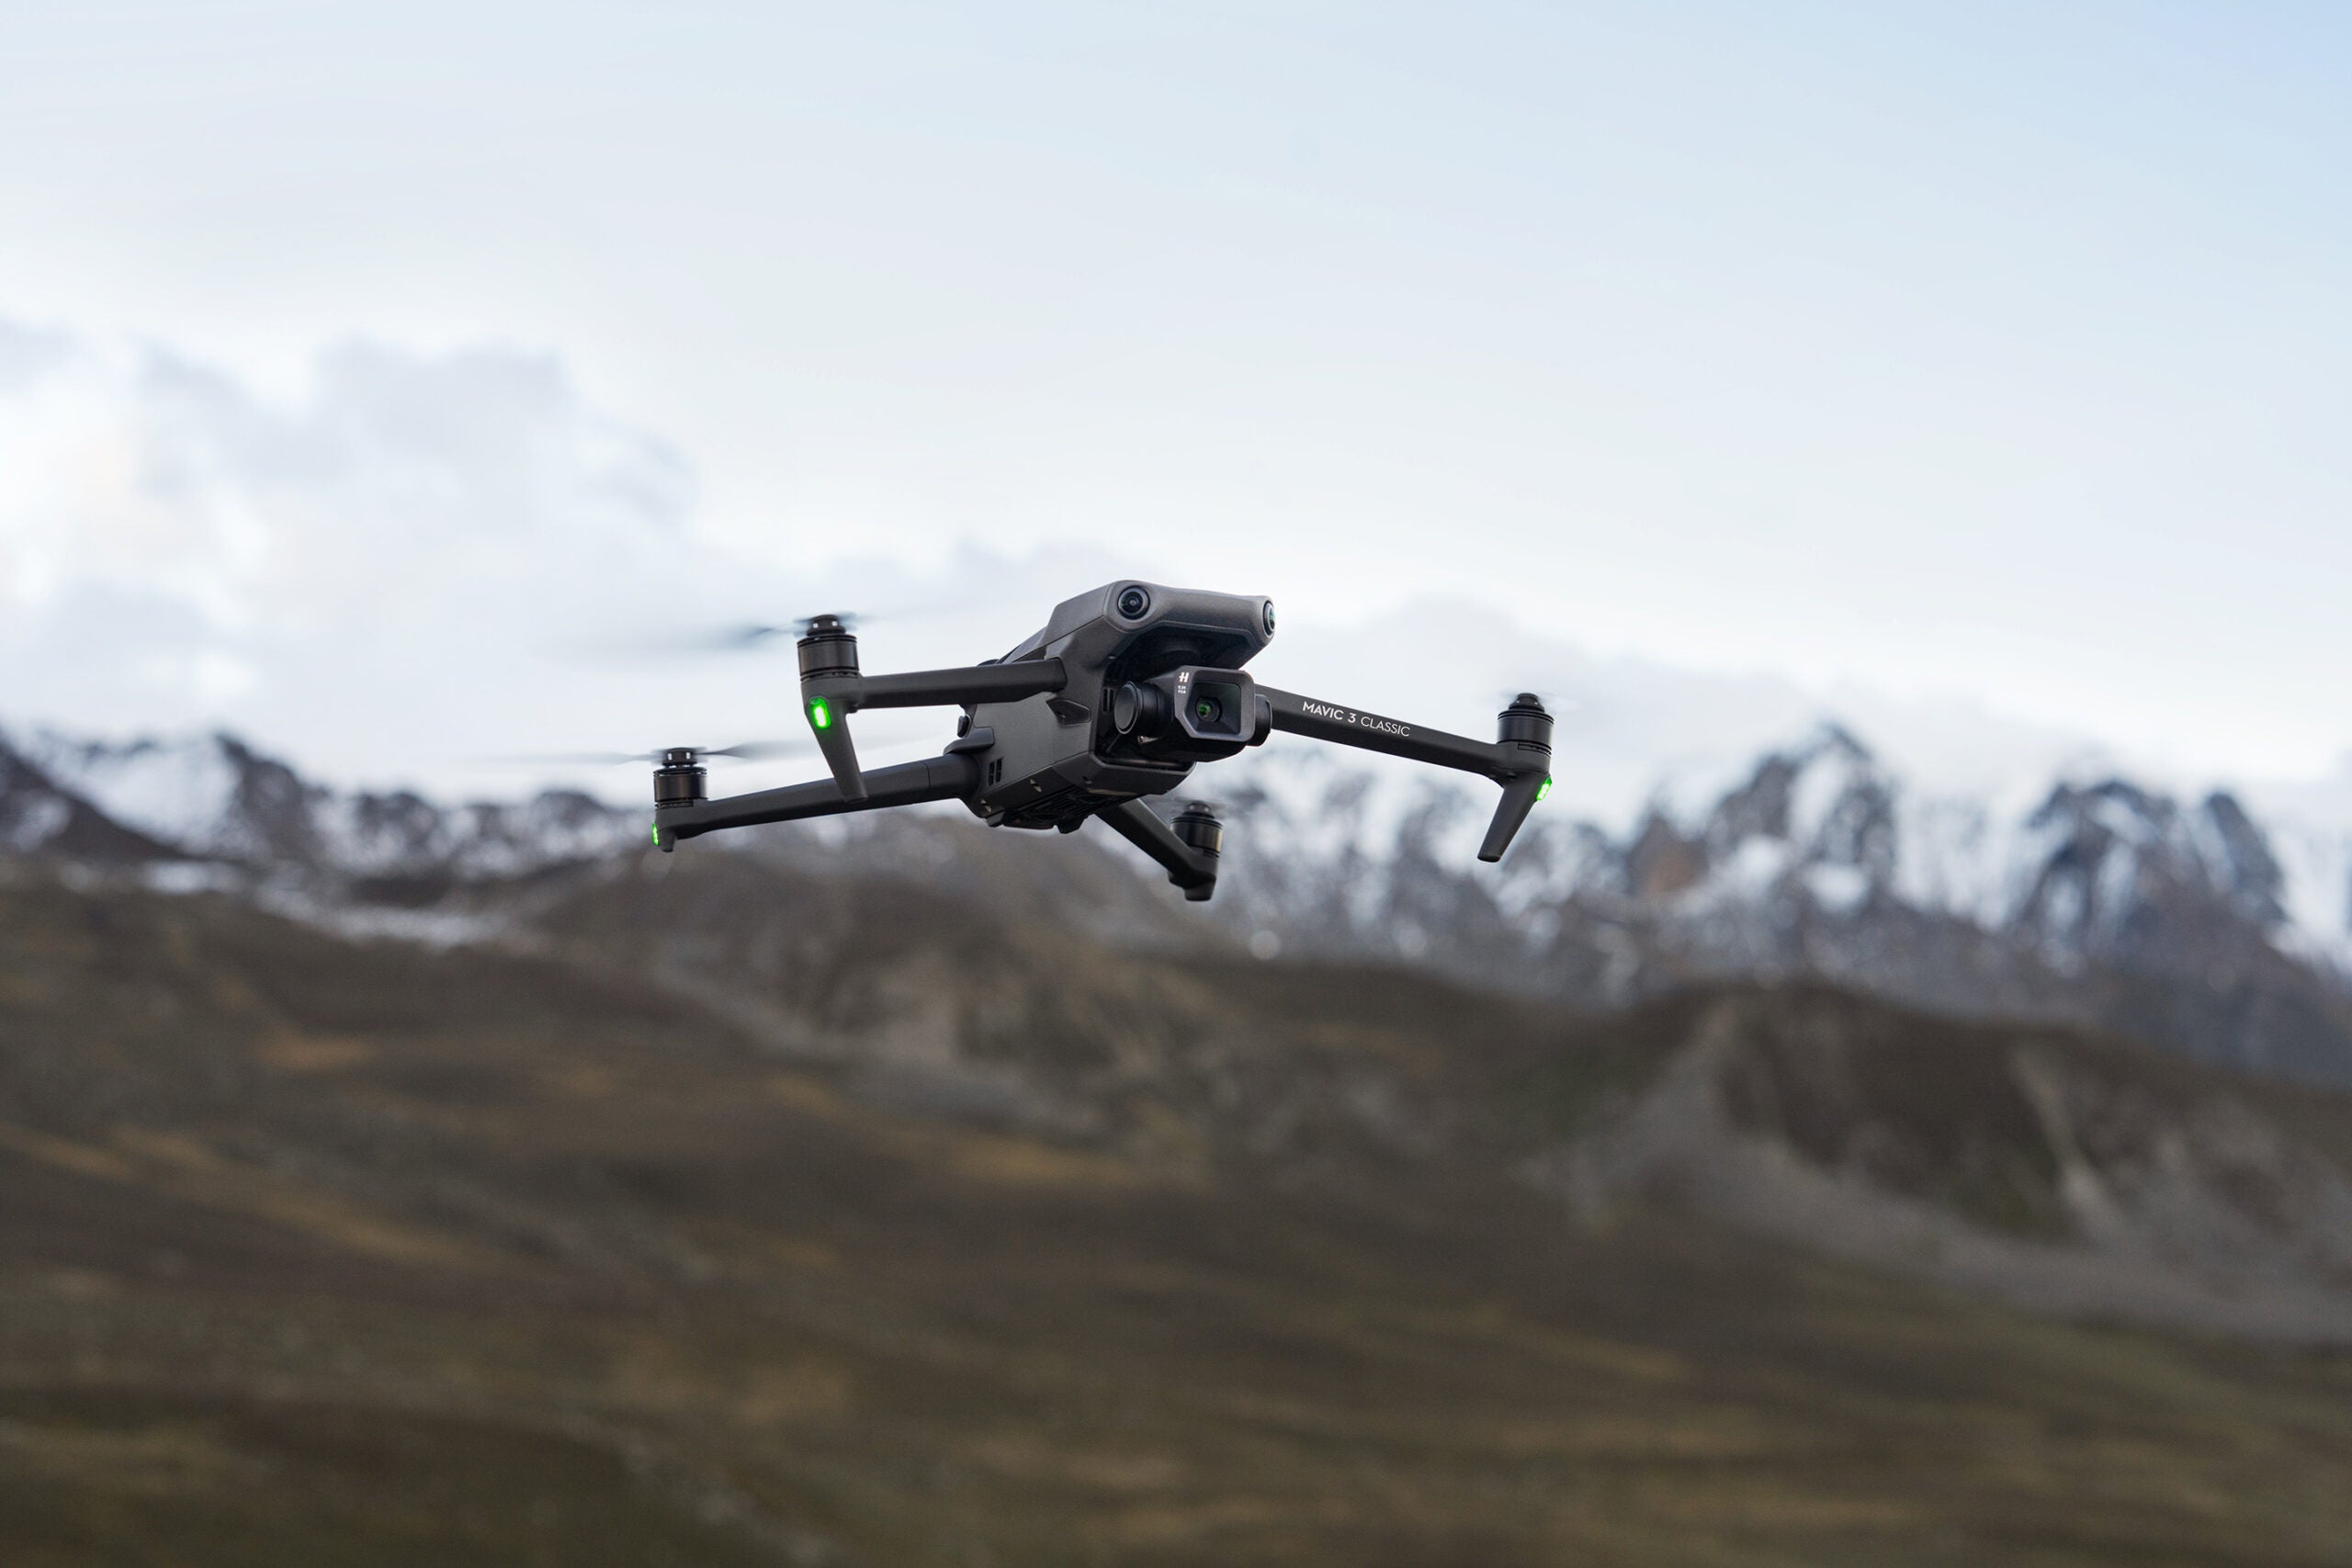 The DJI Mavic 3 Classic has lots of safety features.